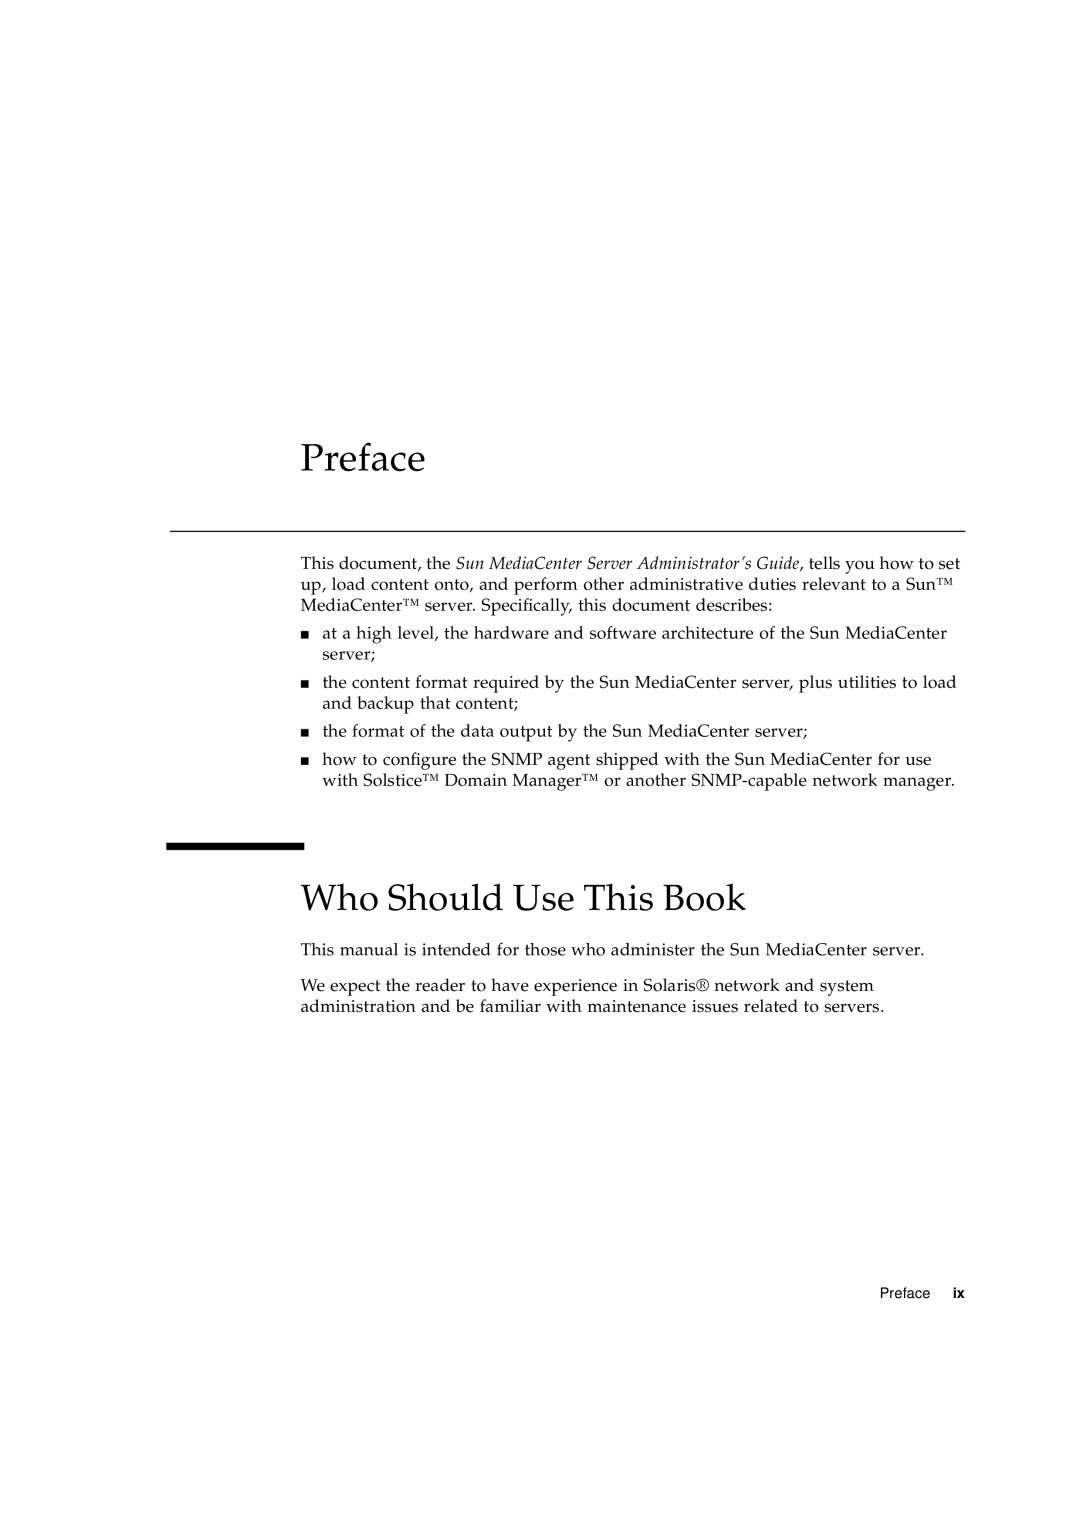 Sun Microsystems 2.1 manual Preface, Who Should Use This Book 